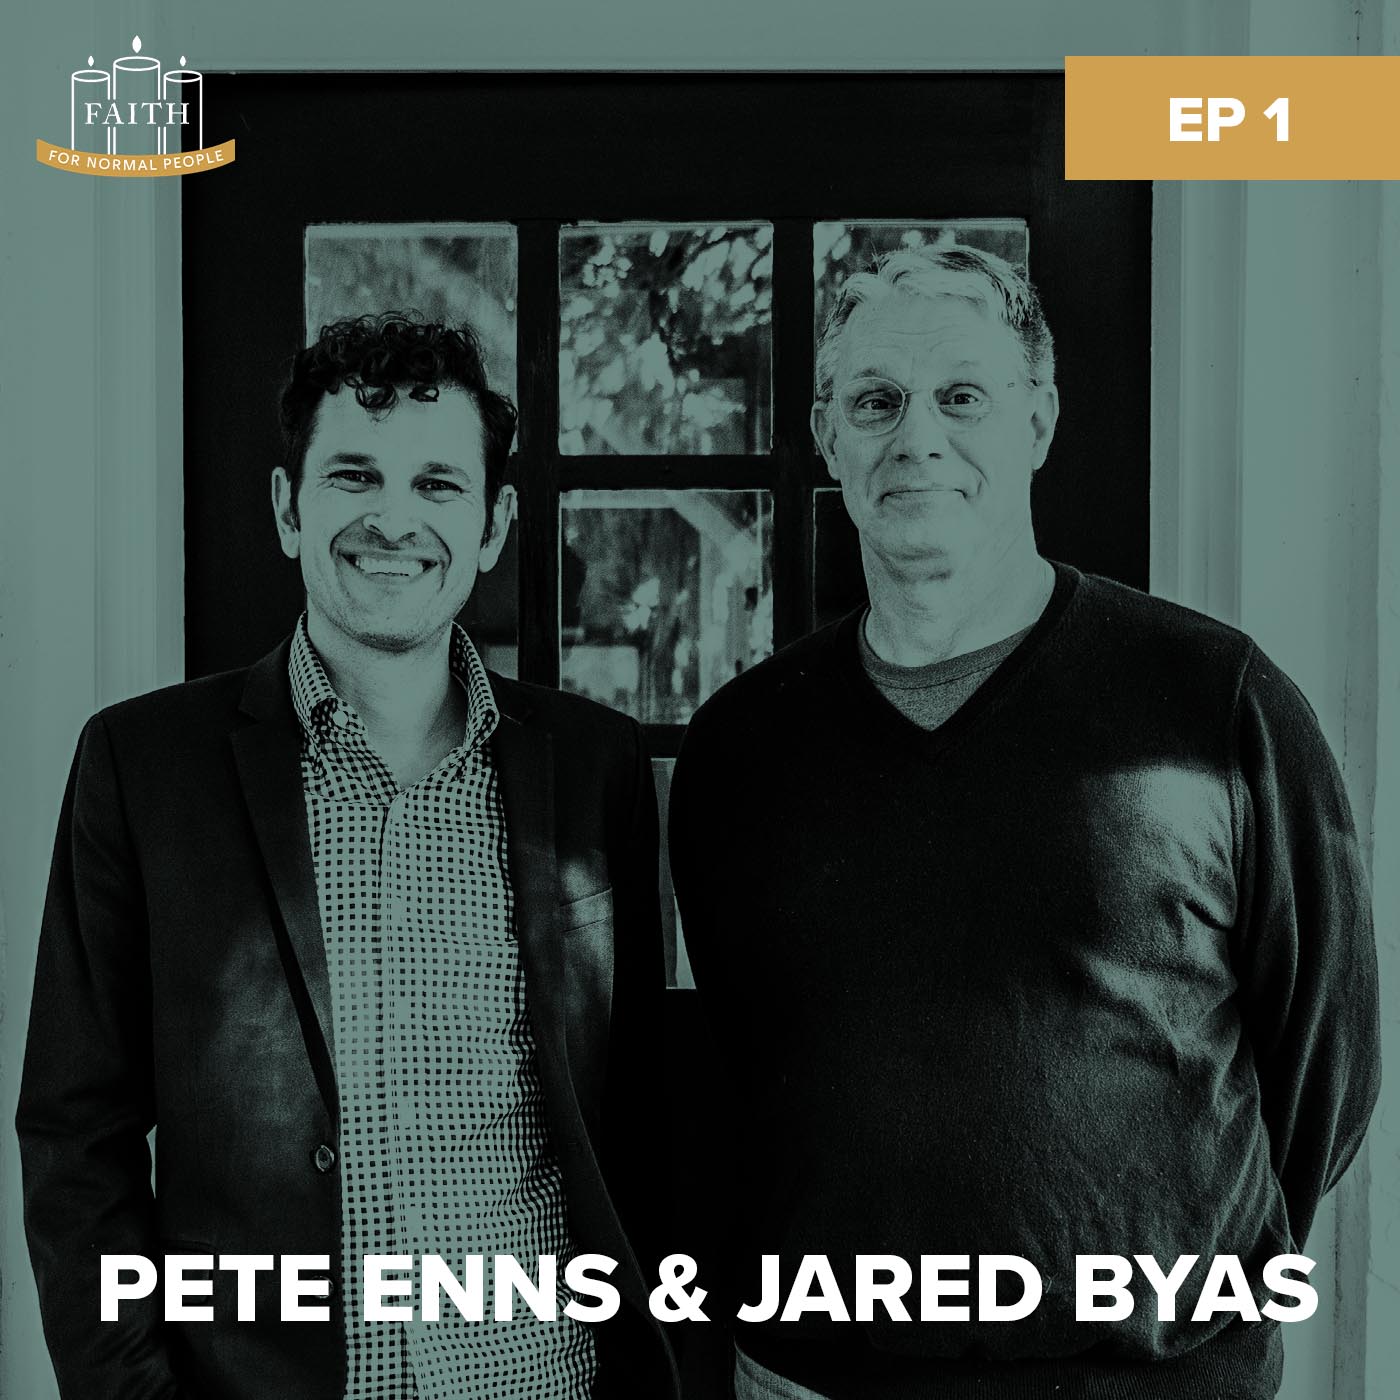 Episode 1: Pete Enns & Jared Byas – What Is Faith for Normal People?